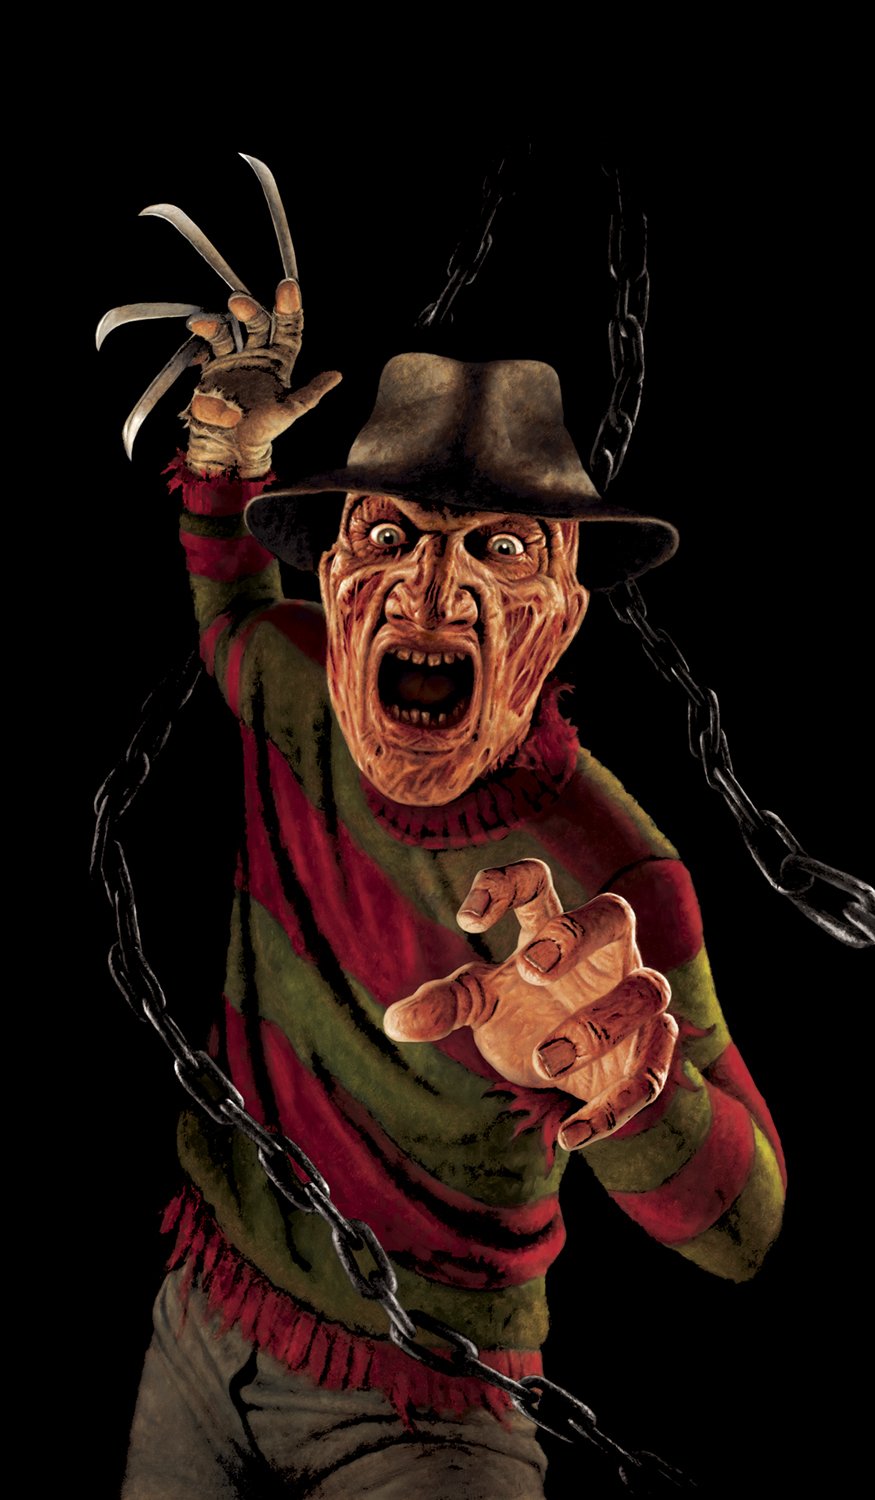 Window Poster Halloween Freddy Krueger by WOWindows USA-Made Decoration Includes 1 Reusable 34.5"x60" Backlit Poster